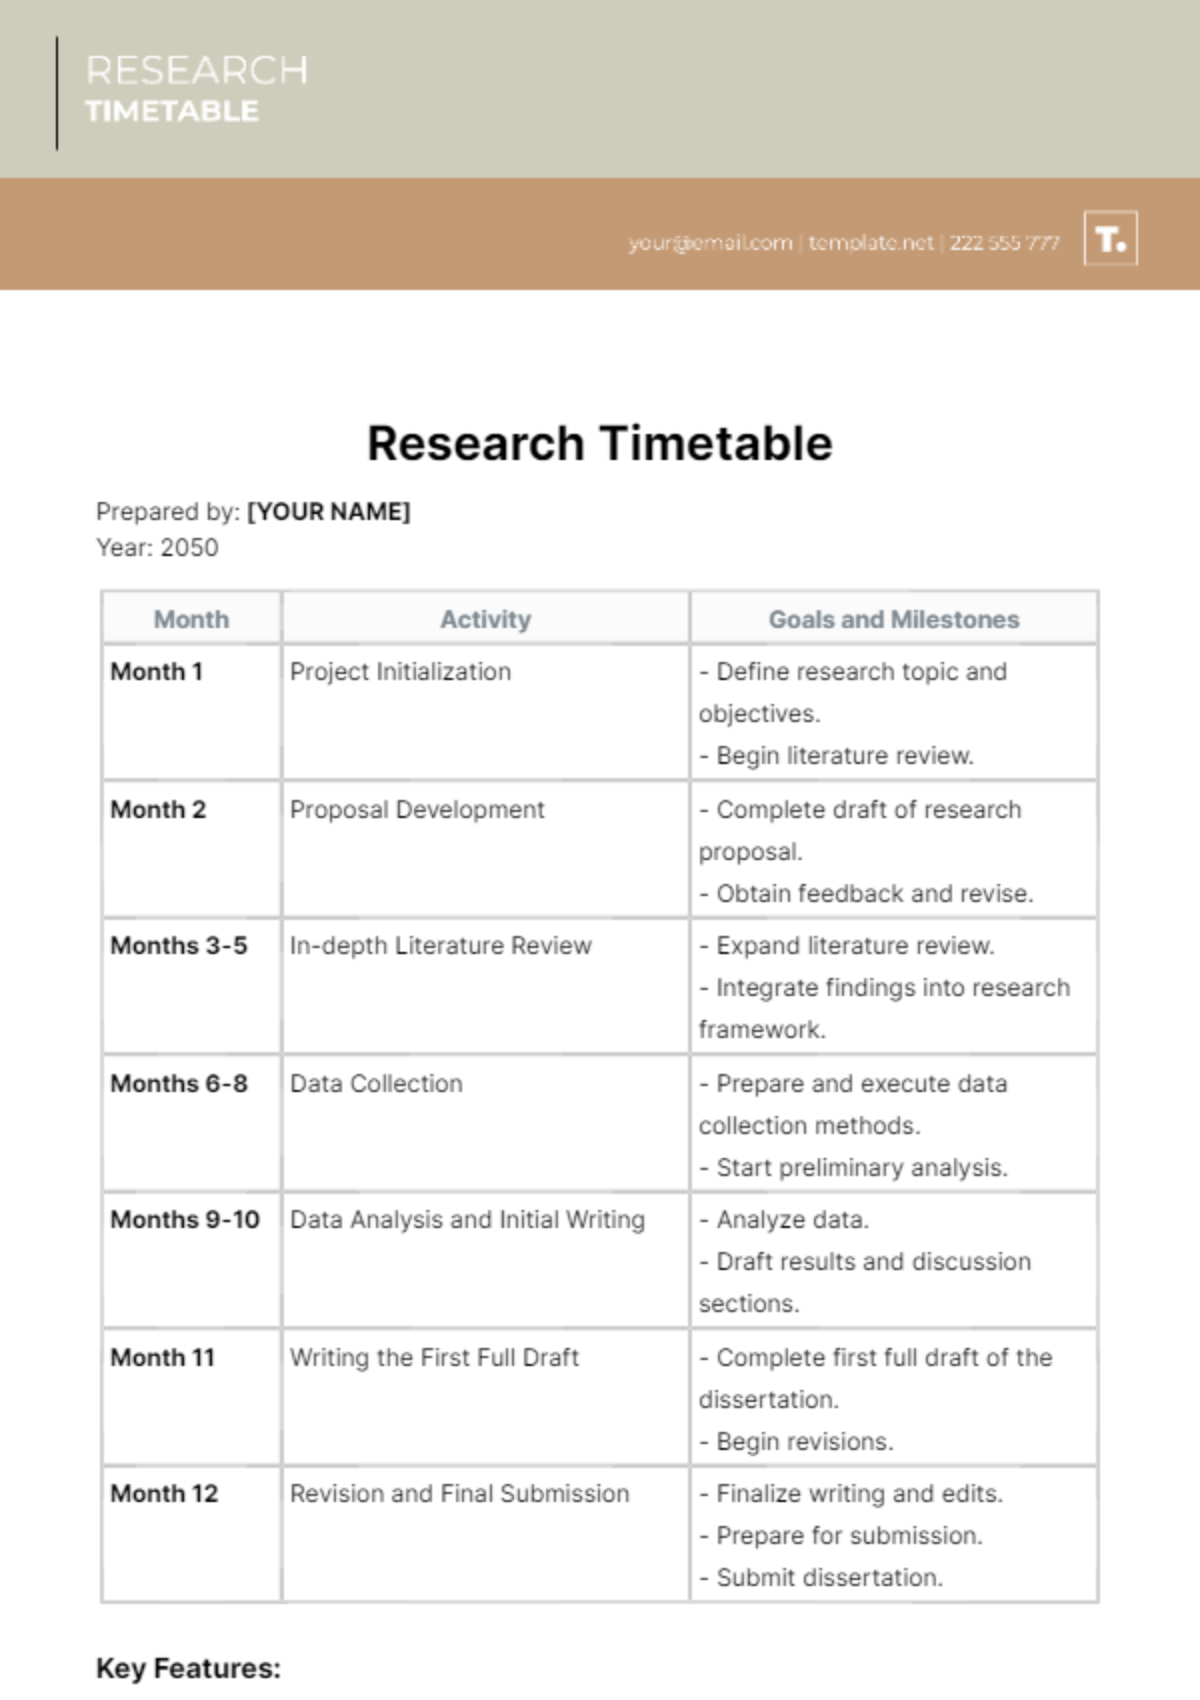 Research Timetable Template